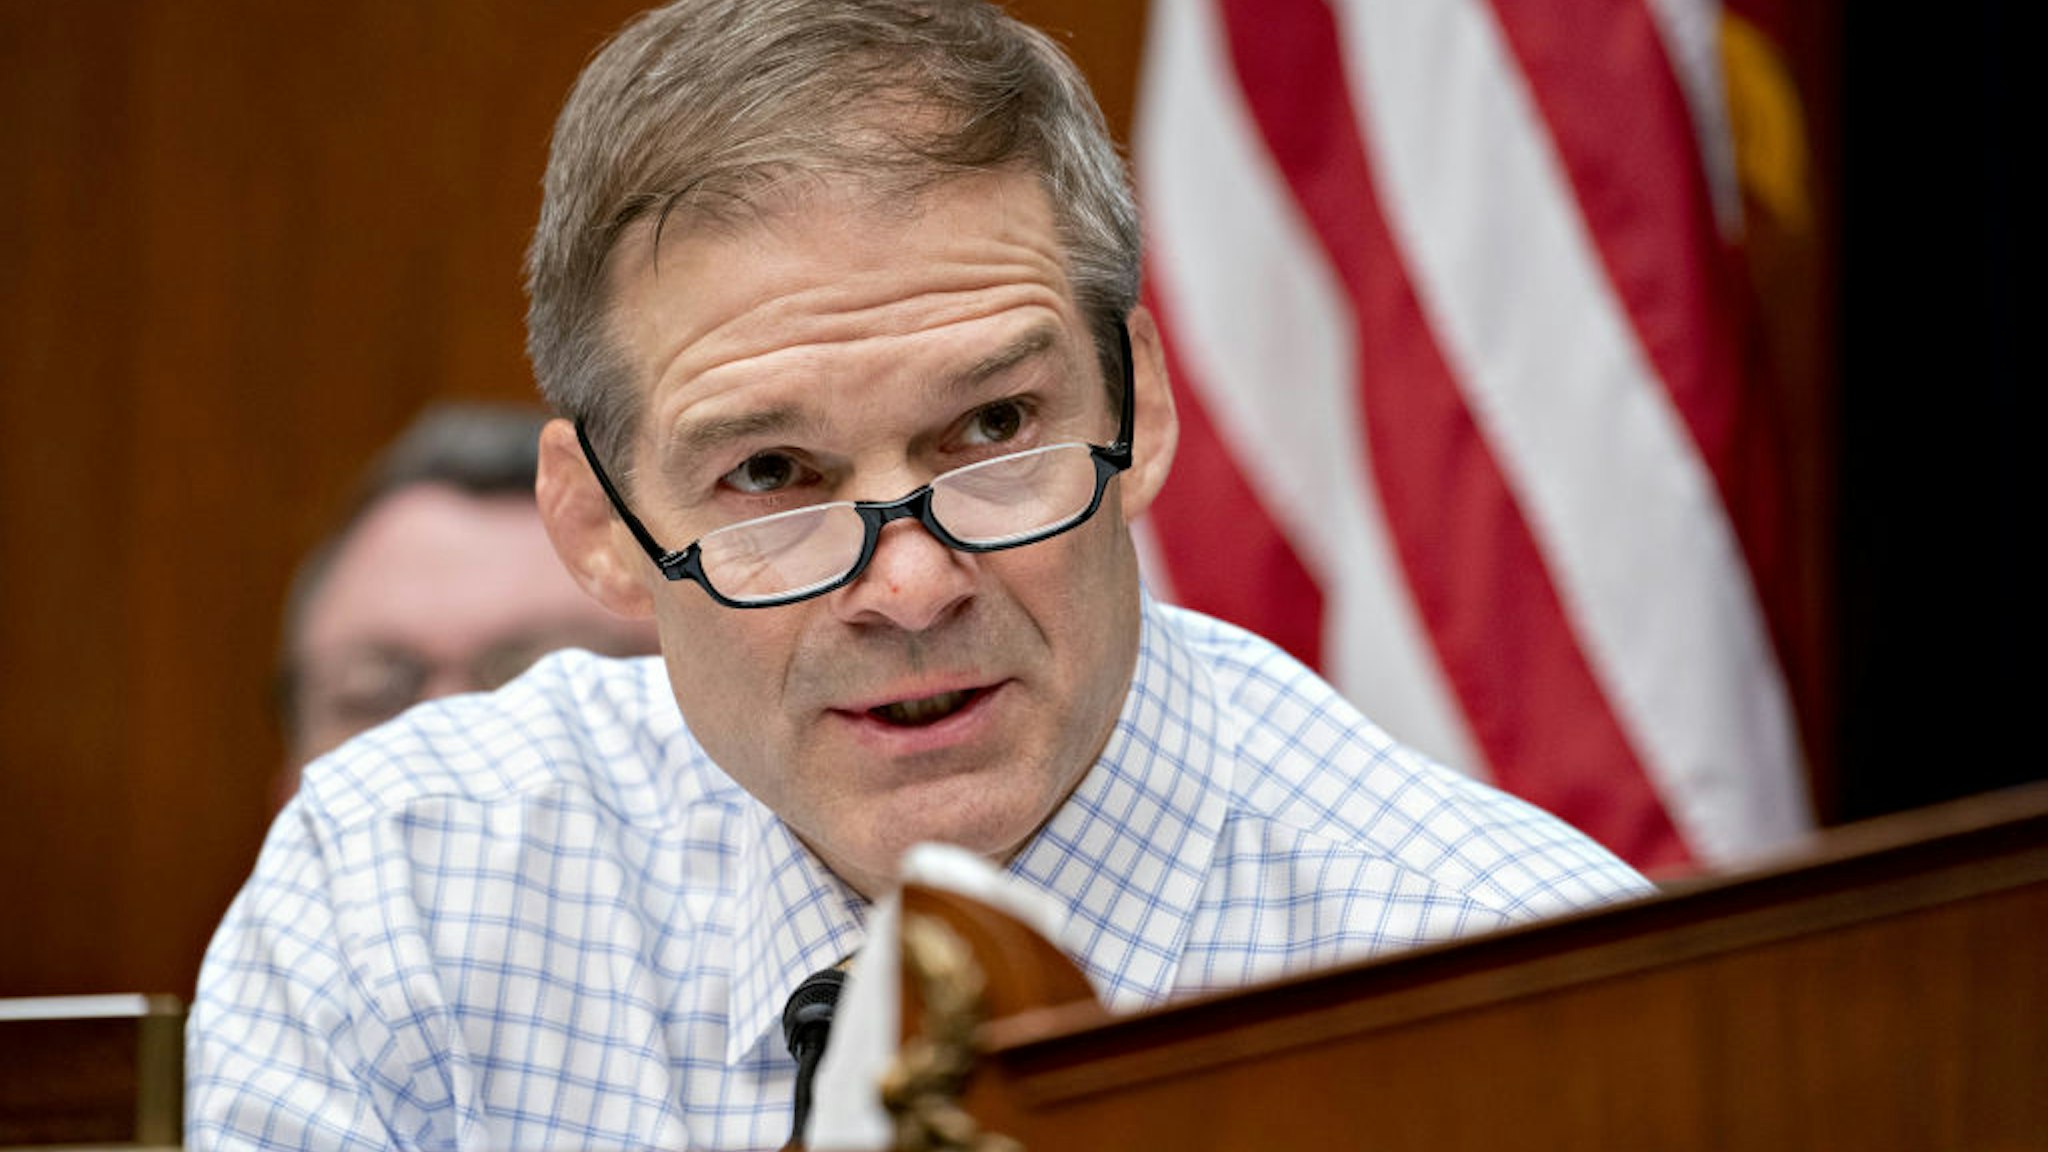 Representative Jim Jordan, a Republican from Ohio and ranking member of the House Oversight Committee, makes an opening statement during a hearing in Washington, D.C., U.S., on Wednesday, March 11, 2020. The U.S. has shifted into a new phase of its coronavirus response after efforts to stamp out sparks of an outbreak have failed. Authorities now are focusing on limiting damage. Photographer: Andrew Harrer/Bloomberg via Getty Images